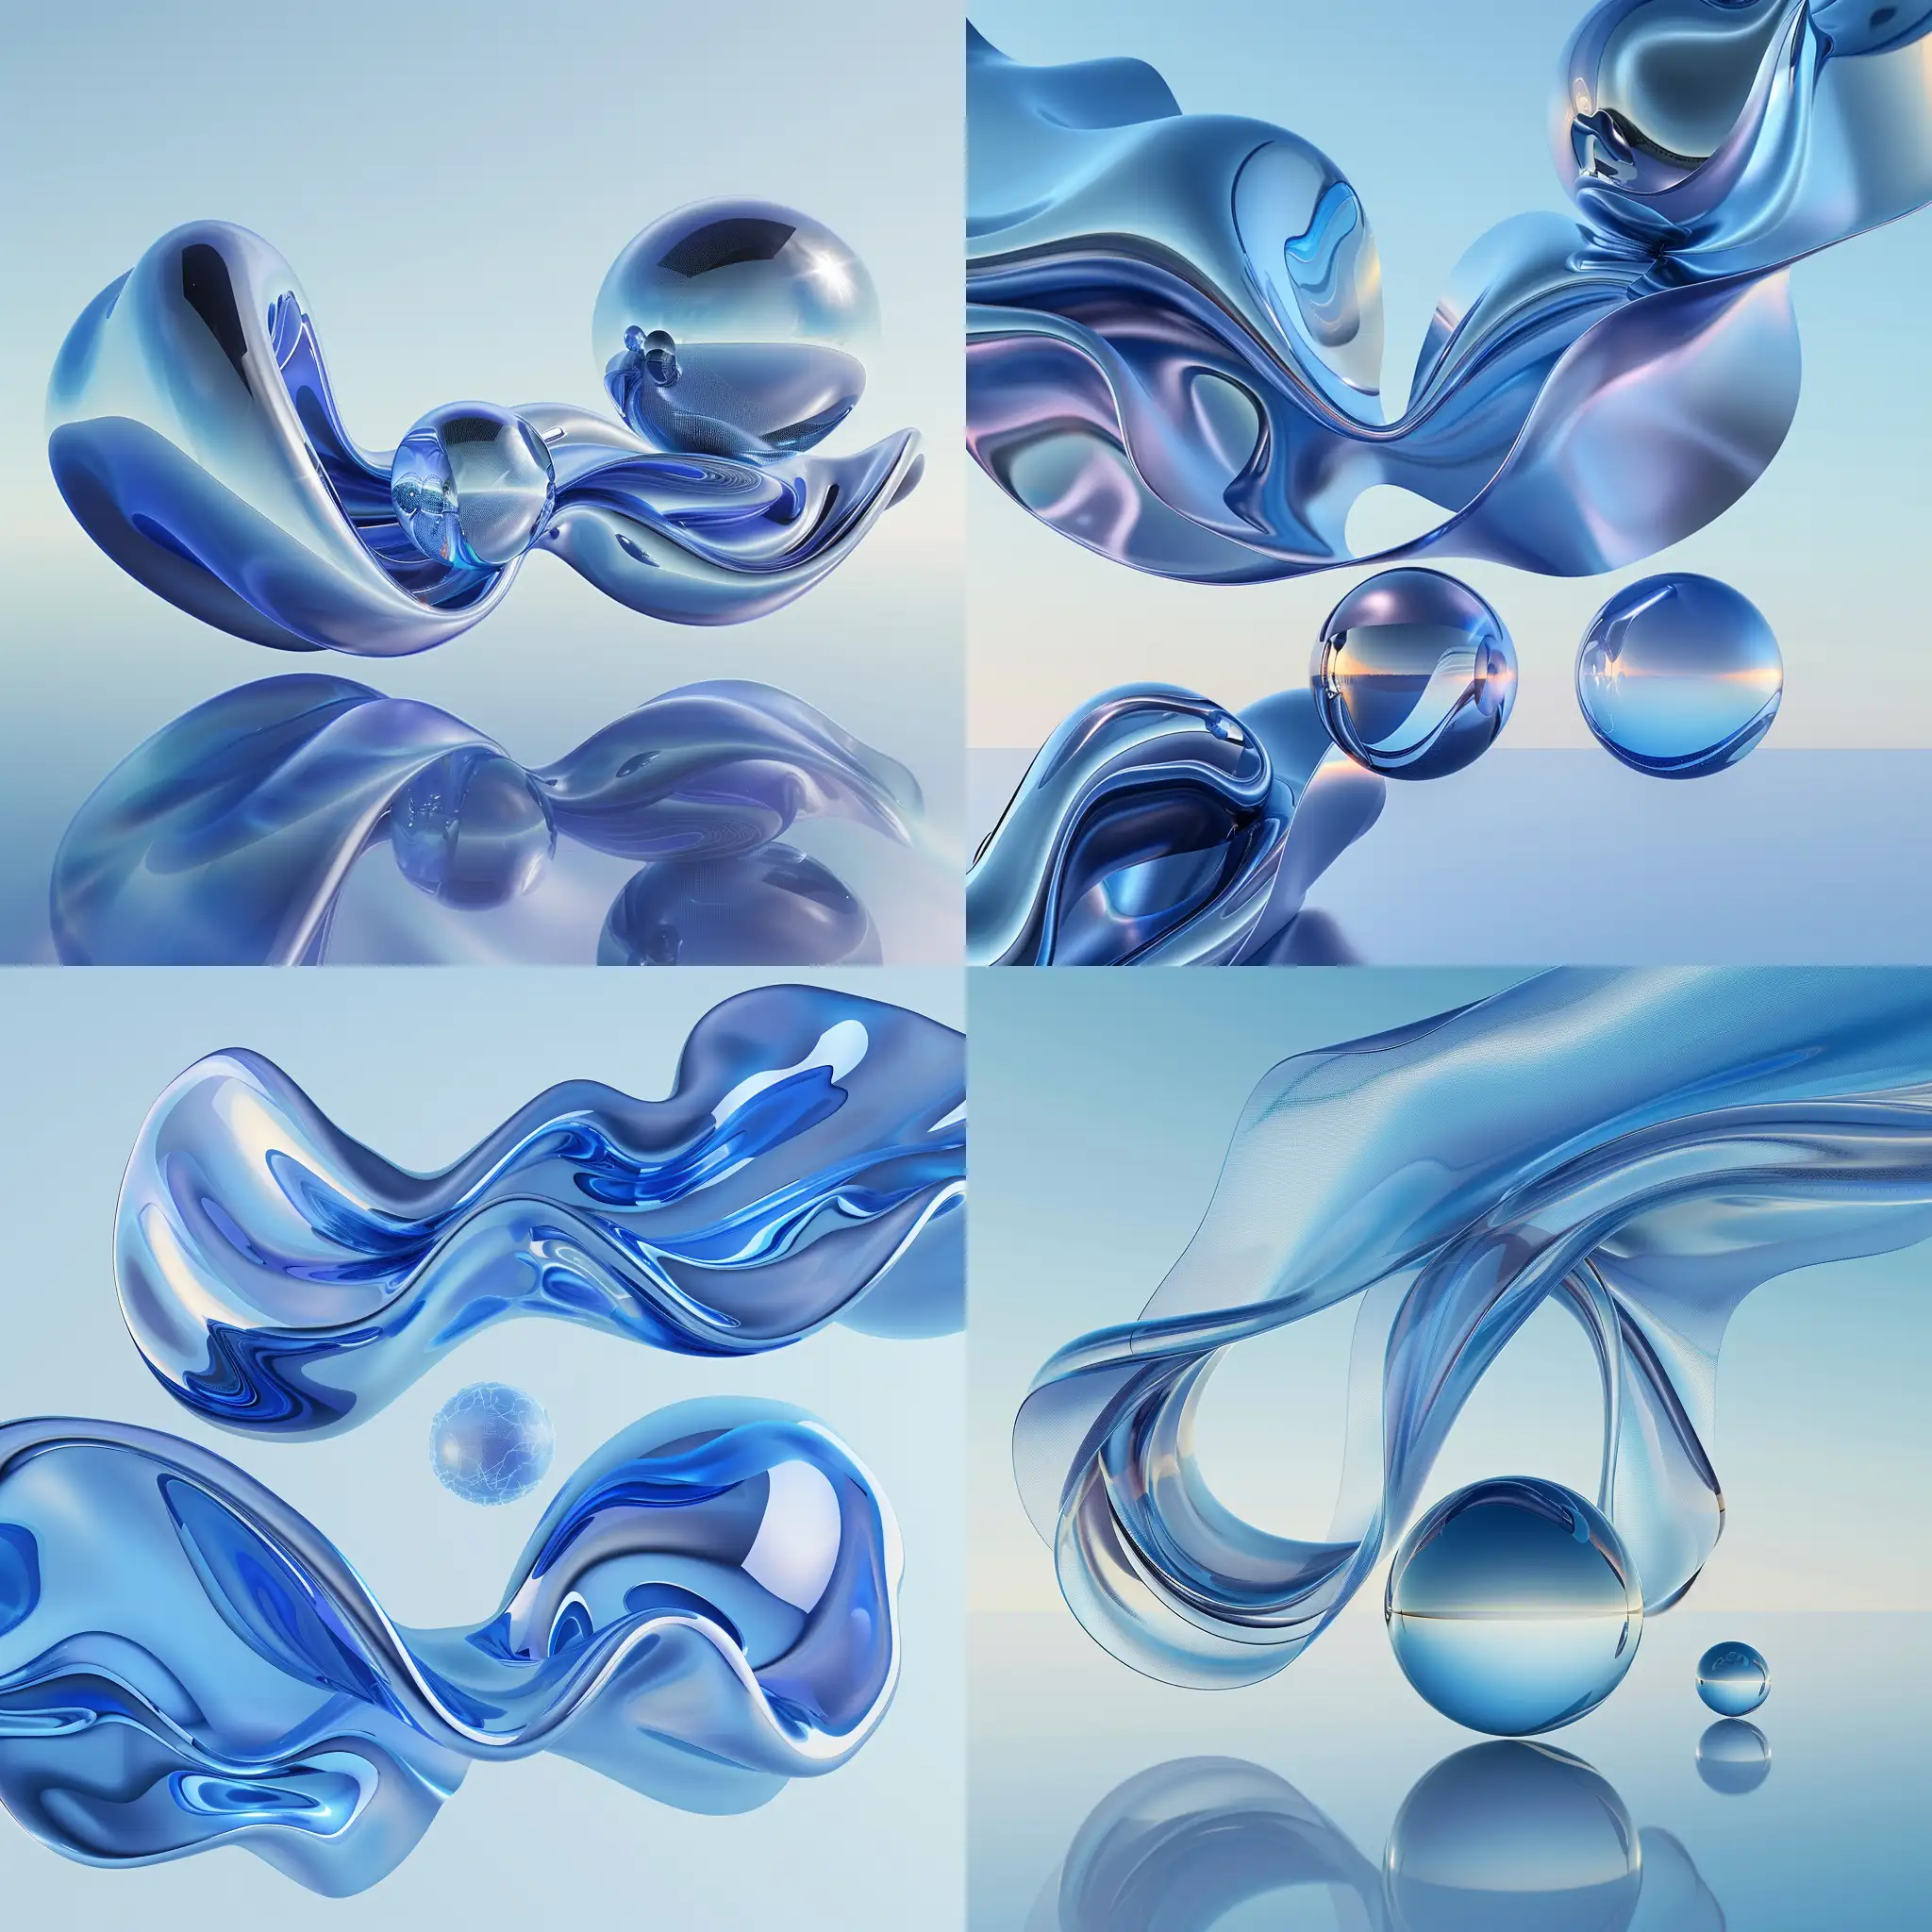 Create a digital image featuring abstract, fluid shapes and reflective spheres that represent technological integration and data flow. Use a palette of blues, ranging from light to deep, to create a sense of depth and innovation. The shapes should be smooth and organic, with a slight gloss, floating on a gradient background that fades from blue to white, suggesting a blend of sky and technology ar——16:9